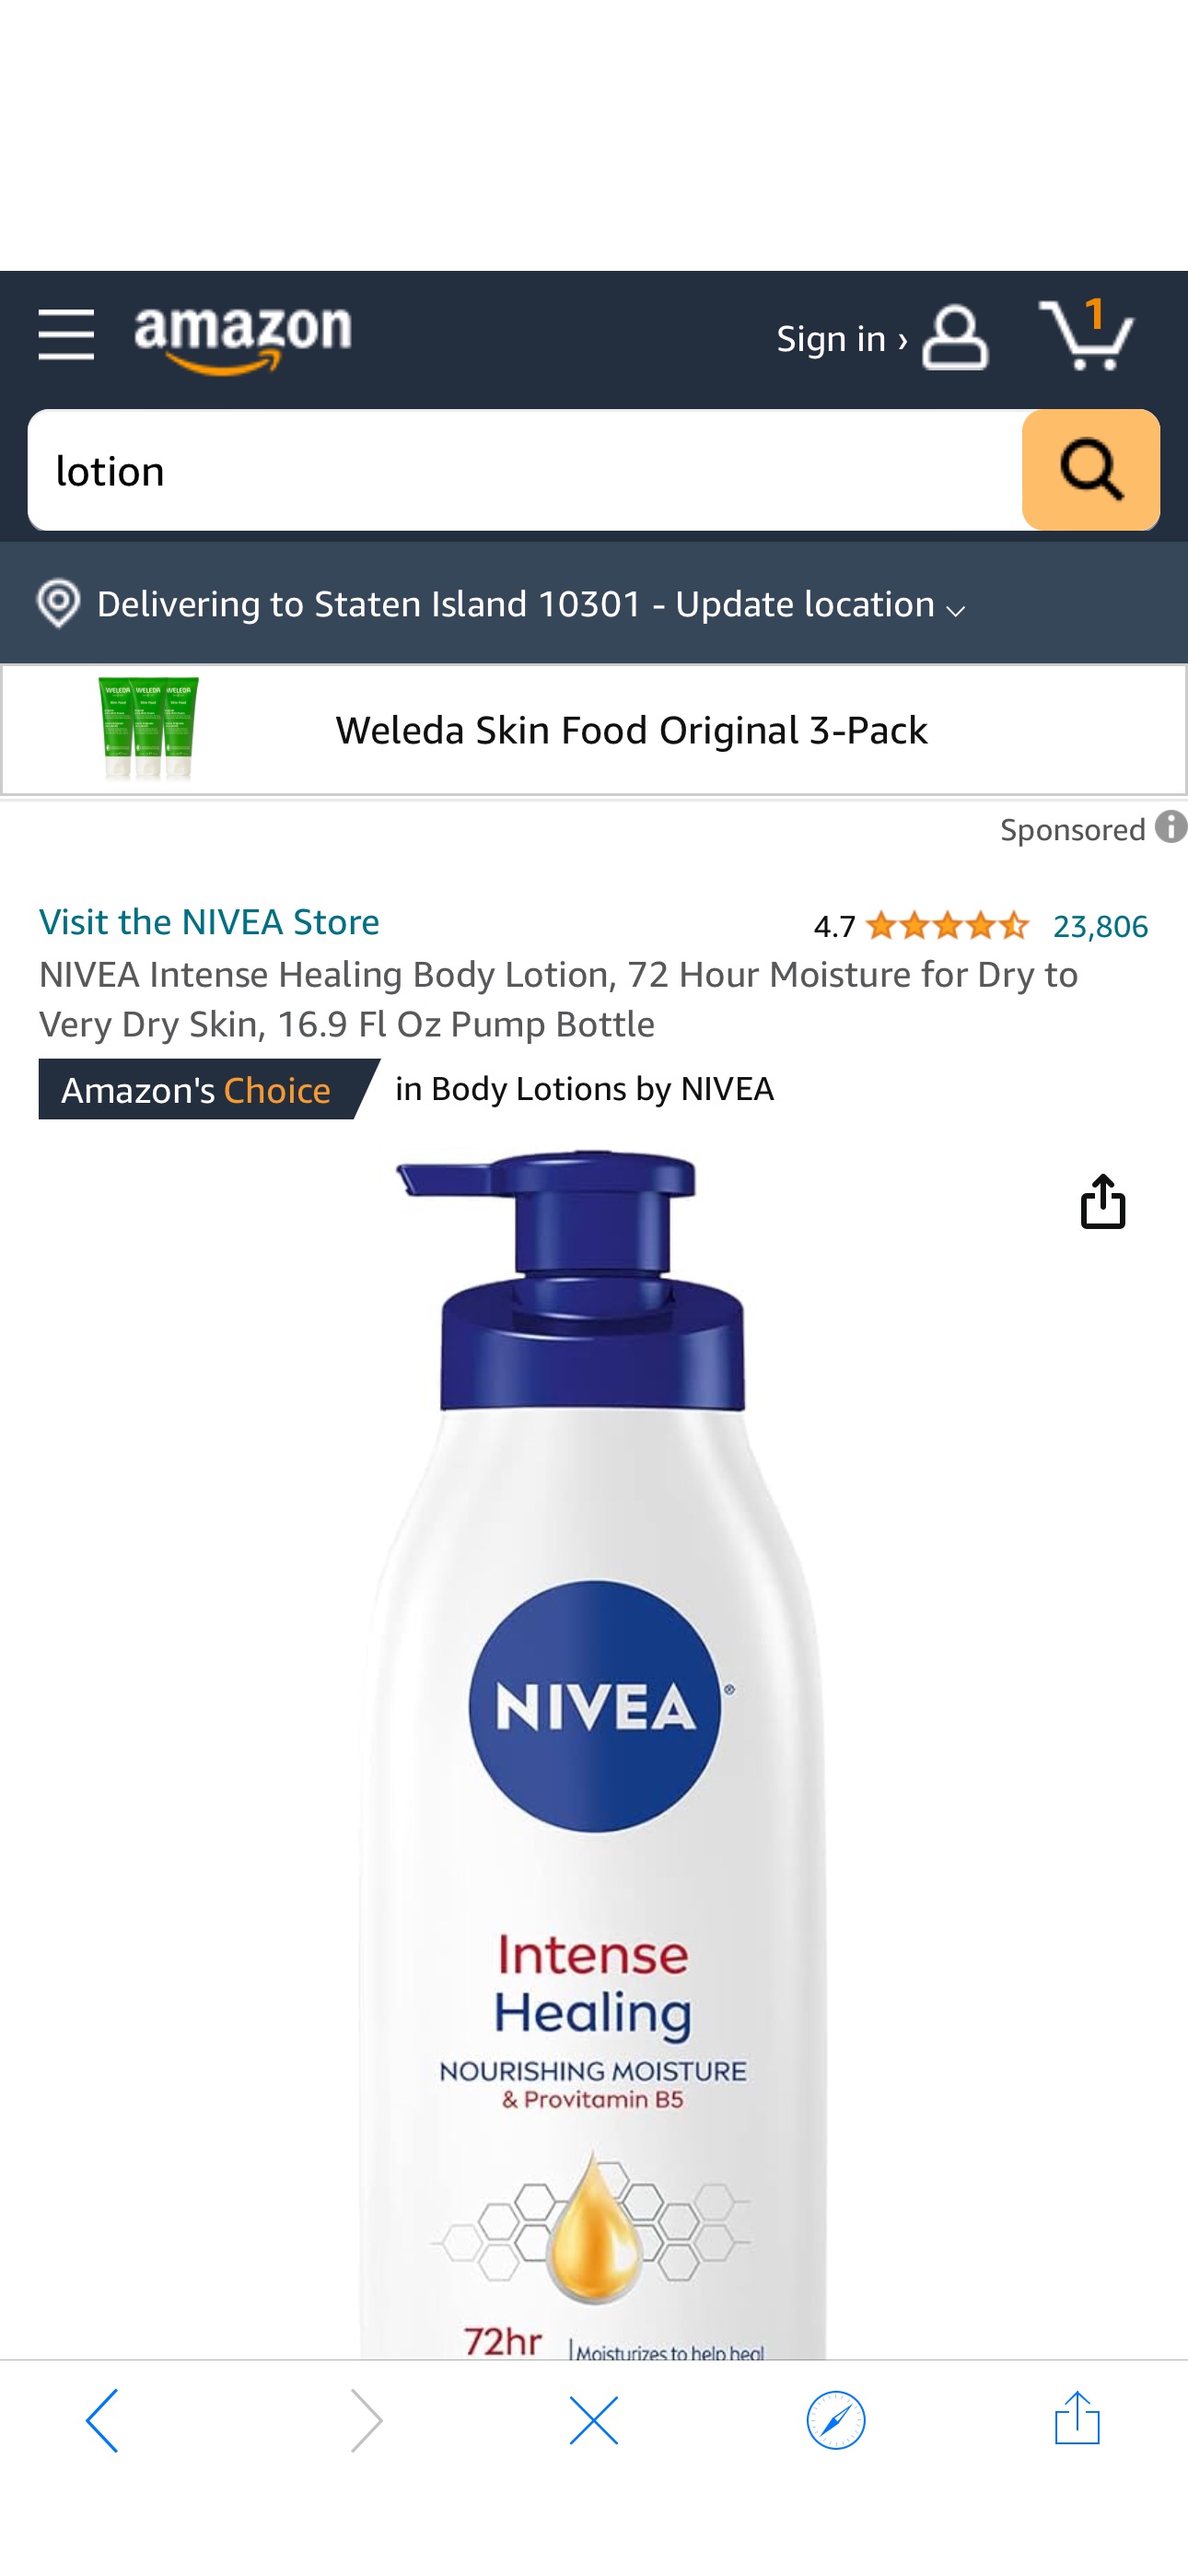 Amazon.com : NIVEA Intense Healing Body Lotion, 72 Hour Moisture for Dry to Very Dry Skin, 16.9 Fl Oz Pump Bottle : Beauty & Personal Care